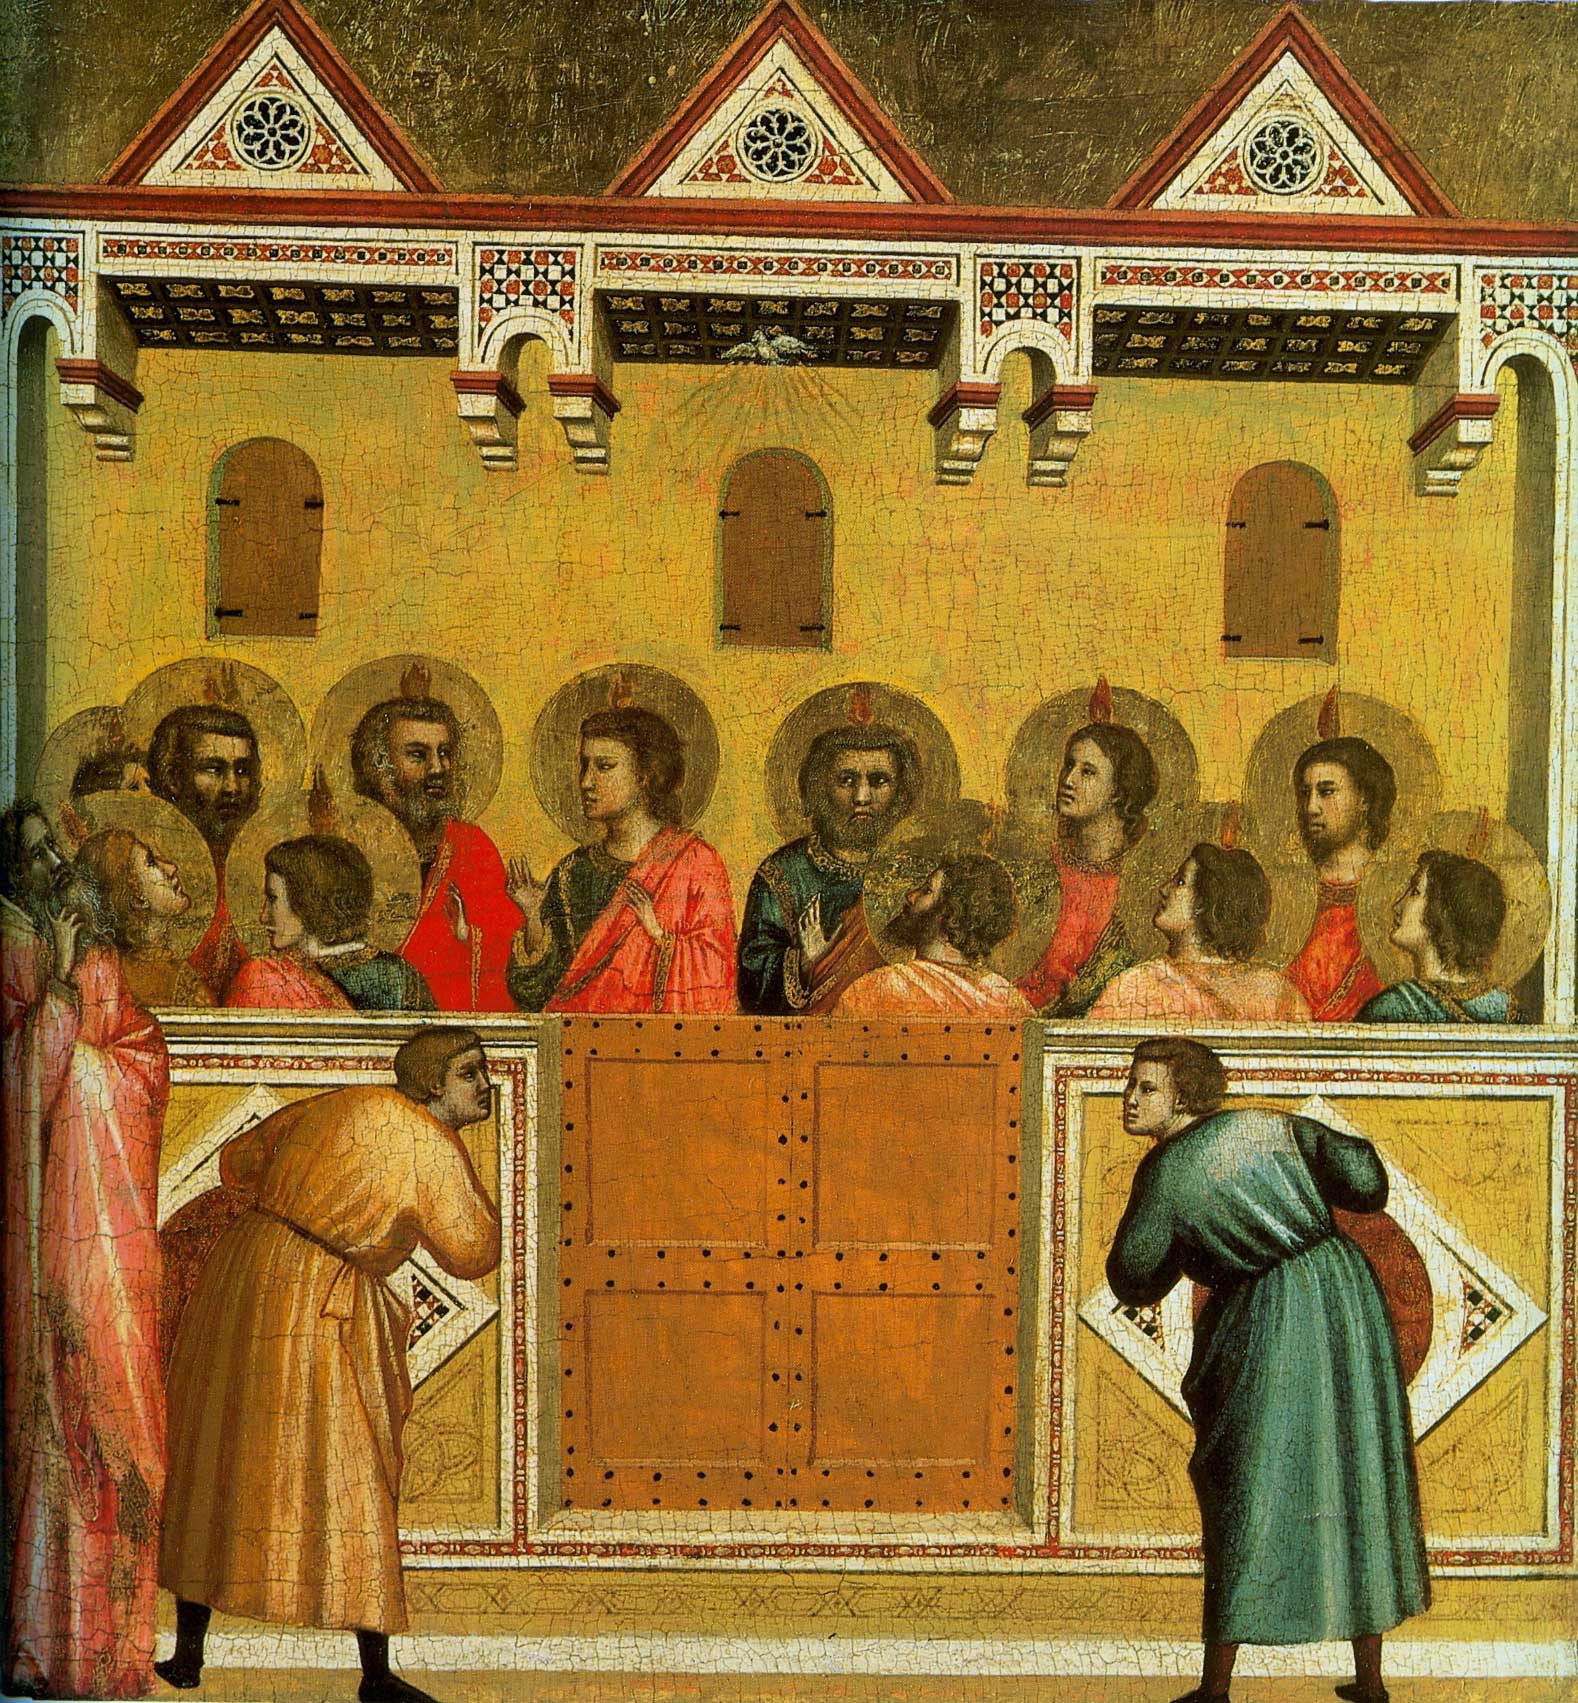 Pentecost by Italian painter Giotto (1267-1337), National Gallery, London.